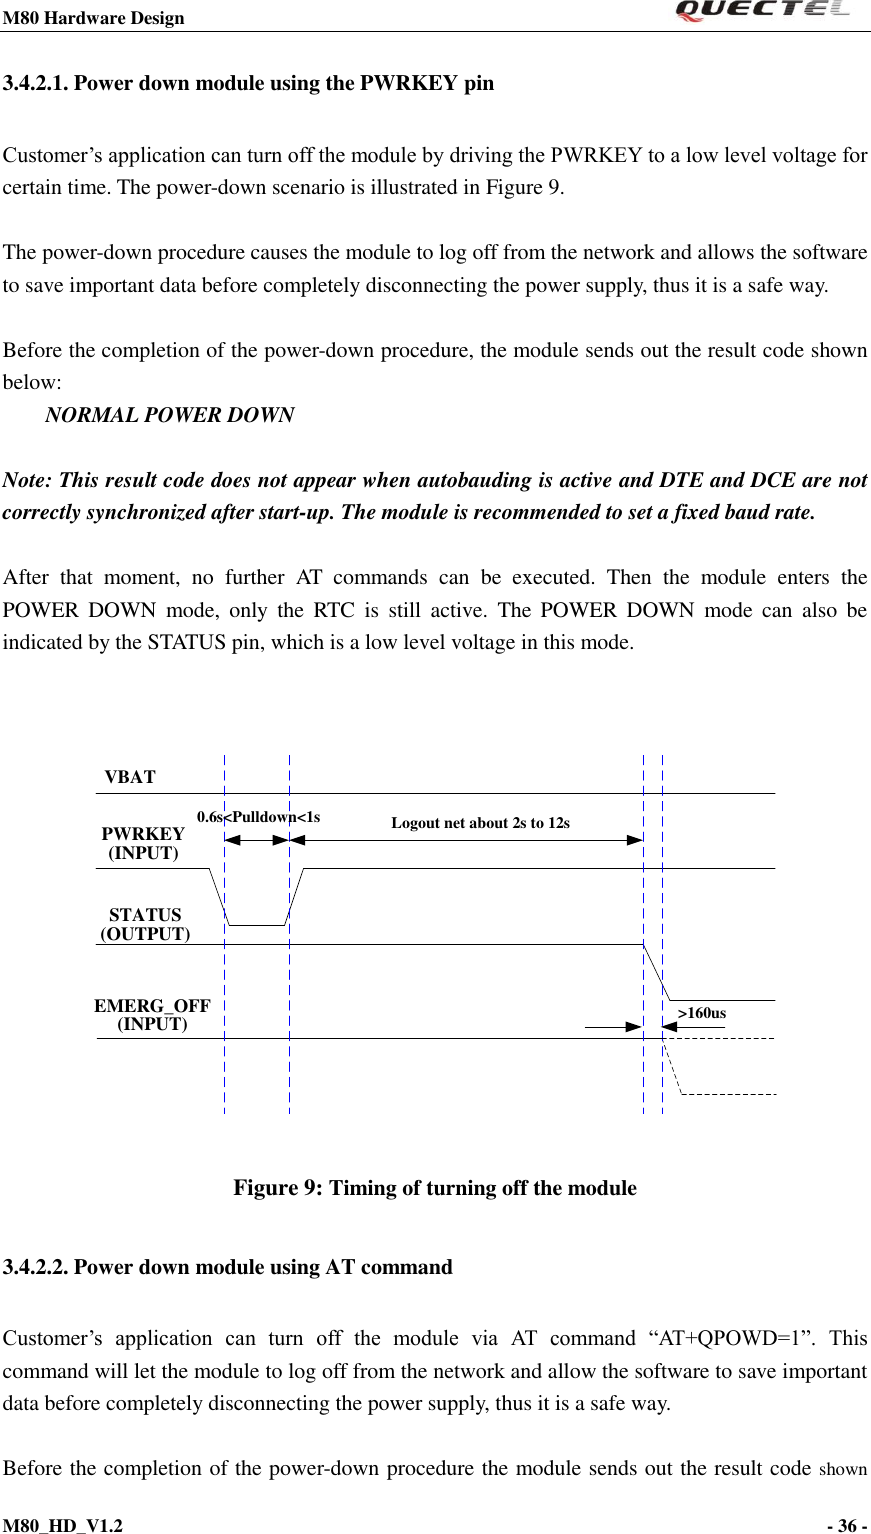 M80 Hardware Design                                                                M80_HD_V1.2                                                                                                                                        - 36 -    3.4.2.1. Power down module using the PWRKEY pin Customer’s application can turn off the module by driving the PWRKEY to a low level voltage for certain time. The power-down scenario is illustrated in Figure 9.  The power-down procedure causes the module to log off from the network and allows the software to save important data before completely disconnecting the power supply, thus it is a safe way.  Before the completion of the power-down procedure, the module sends out the result code shown below: NORMAL POWER DOWN  Note: This result code does not appear when autobauding is active and DTE and DCE are not correctly synchronized after start-up. The module is recommended to set a fixed baud rate.  After  that  moment,  no  further  AT  commands  can  be  executed.  Then  the  module  enters  the POWER  DOWN  mode,  only  the  RTC  is  still  active.  The  POWER  DOWN  mode  can  also  be indicated by the STATUS pin, which is a low level voltage in this mode.   VBATPWRKEY(INPUT)STATUS(OUTPUT)EMERG_OFF(INPUT)Logout net about 2s to 12s0.6s&lt;Pulldown&lt;1s&gt;160us Figure 9: Timing of turning off the module   3.4.2.2. Power down module using AT command Customer’s  application  can  turn  off  the  module  via  AT  command  “AT+QPOWD=1”.  This command will let the module to log off from the network and allow the software to save important data before completely disconnecting the power supply, thus it is a safe way.  Before the completion of the power-down procedure the module sends out the result code shown 